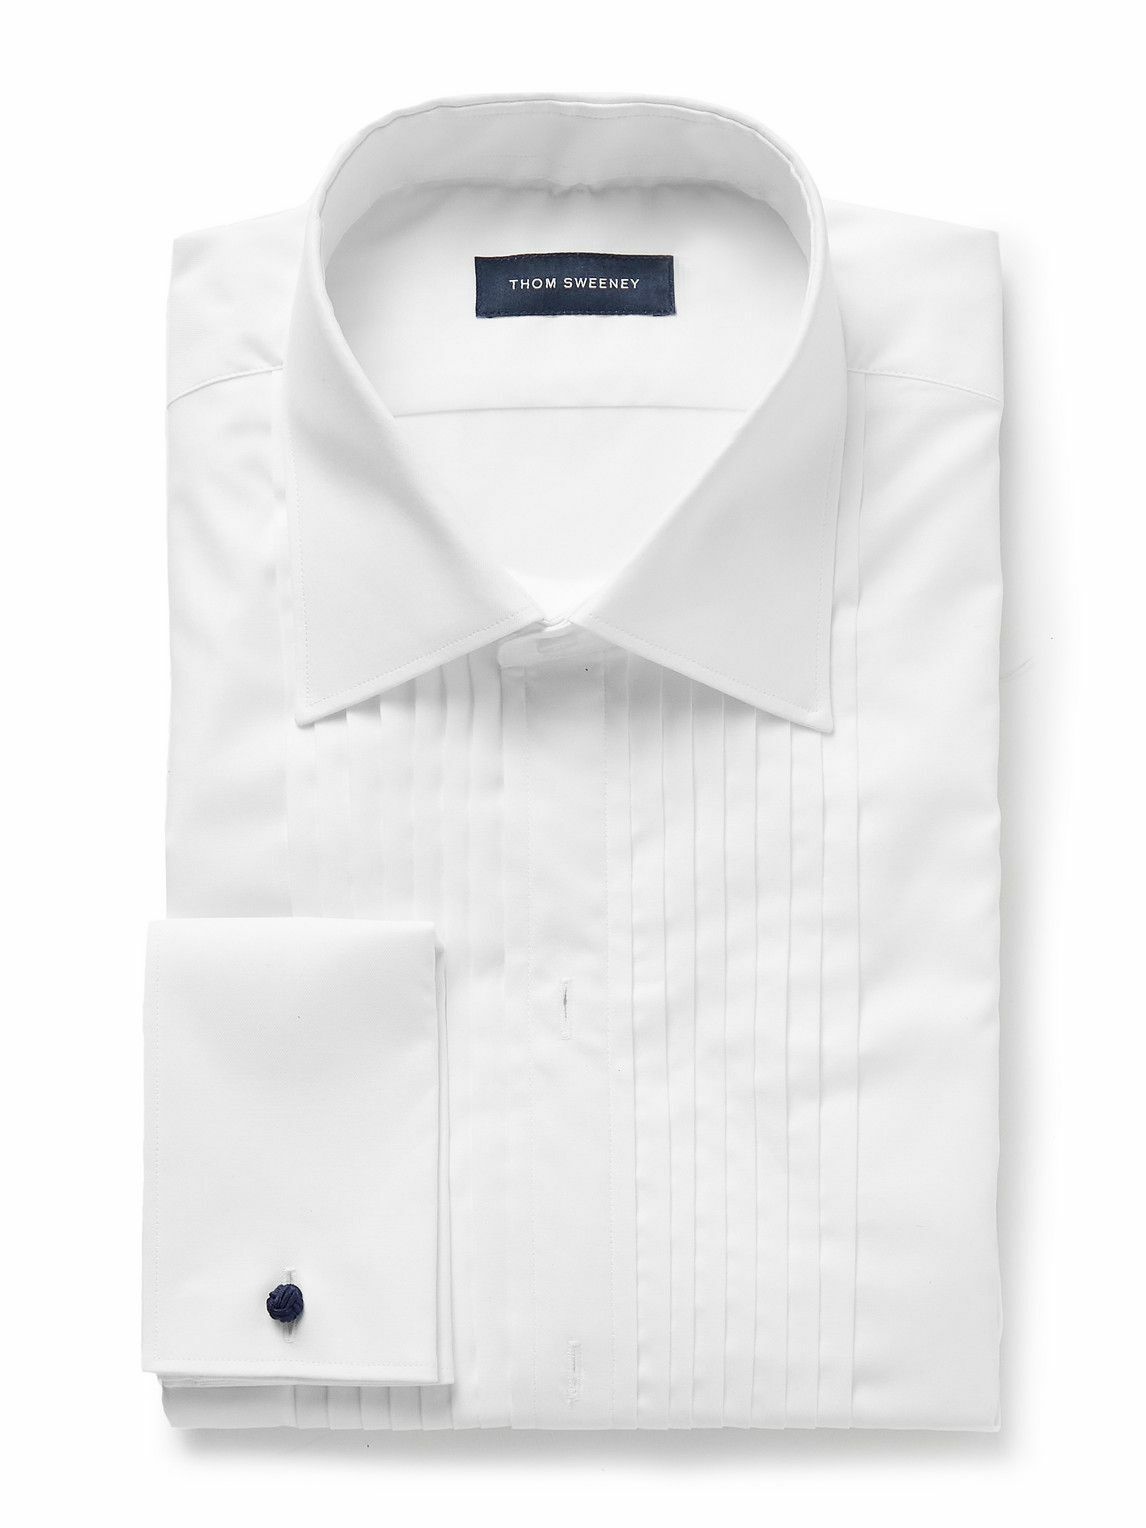 Thom Sweeney - Duke of York Bib-Front Double-Cuff Cotton and Lyocell ...